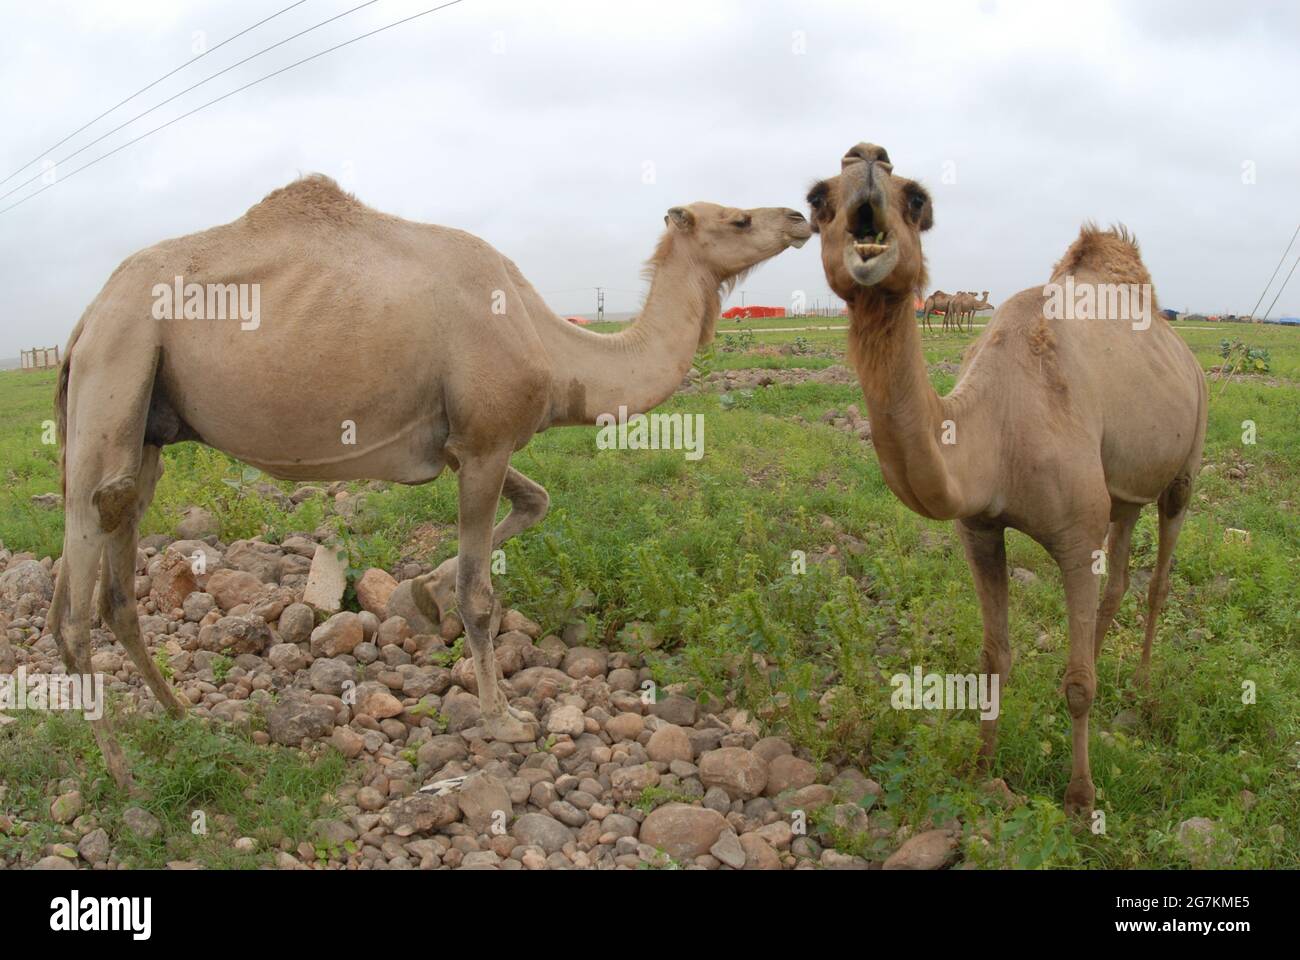 Animals. Camel in south of Oman, Salalah. Middle east camels species of large ruminating hoofed mammals known for their ability to go for long periods Stock Photo